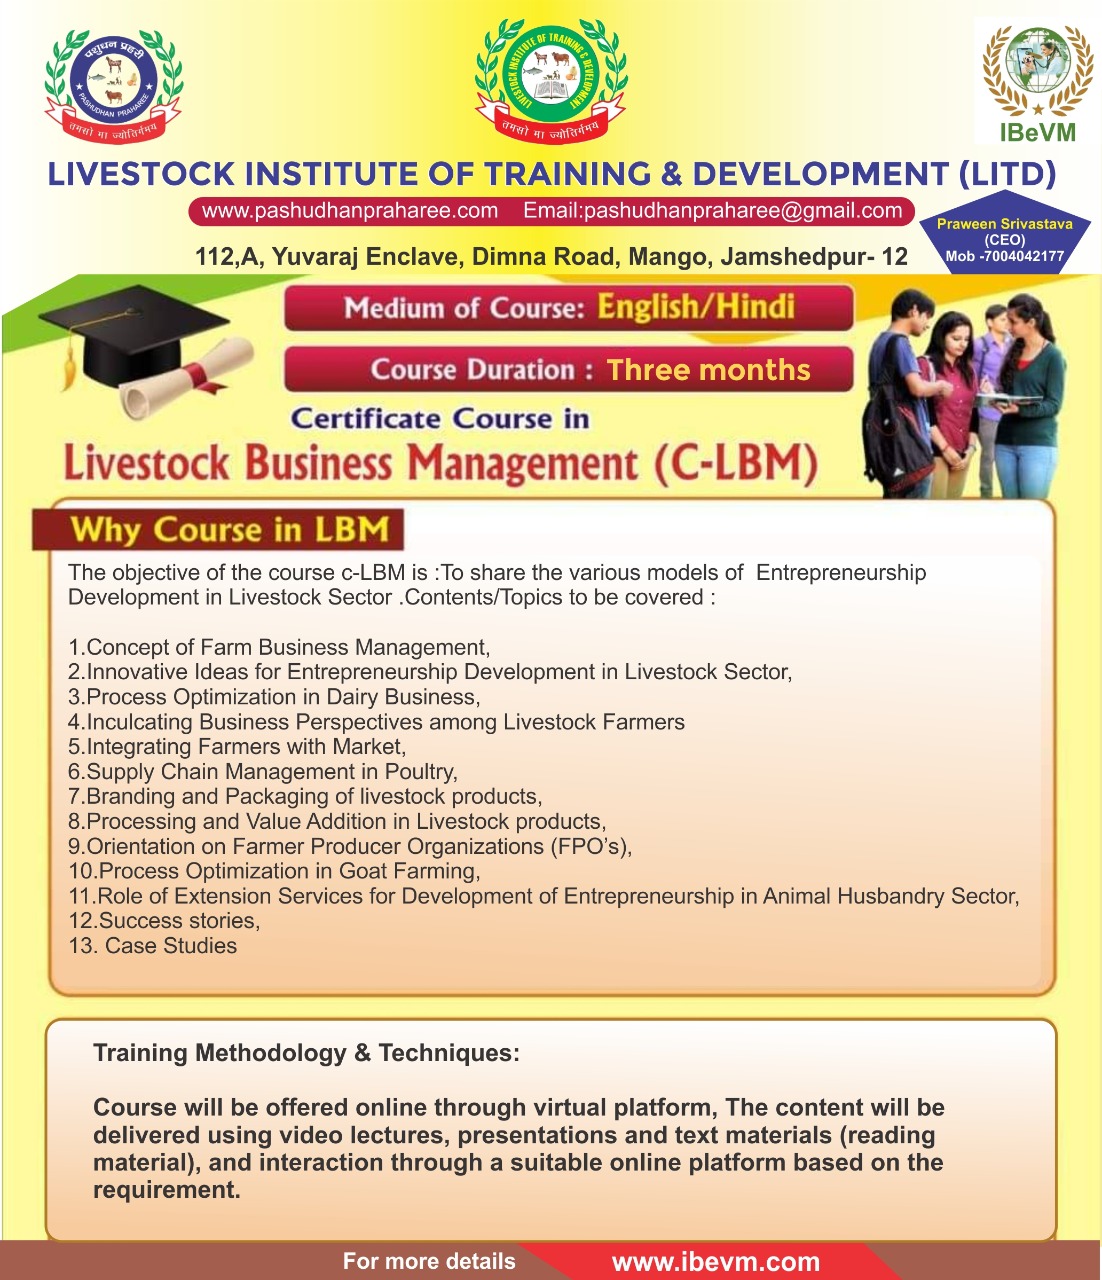 CERTIFICATE COURSE IN LIVESTOCK BUSINESS MANAGEMENT (LBM) LAUNCHED BY  LIVESTOCK INSTITUTE OF TRAINING & DEVELOPMENT- LITD(Regd.) – Pashudhan  praharee